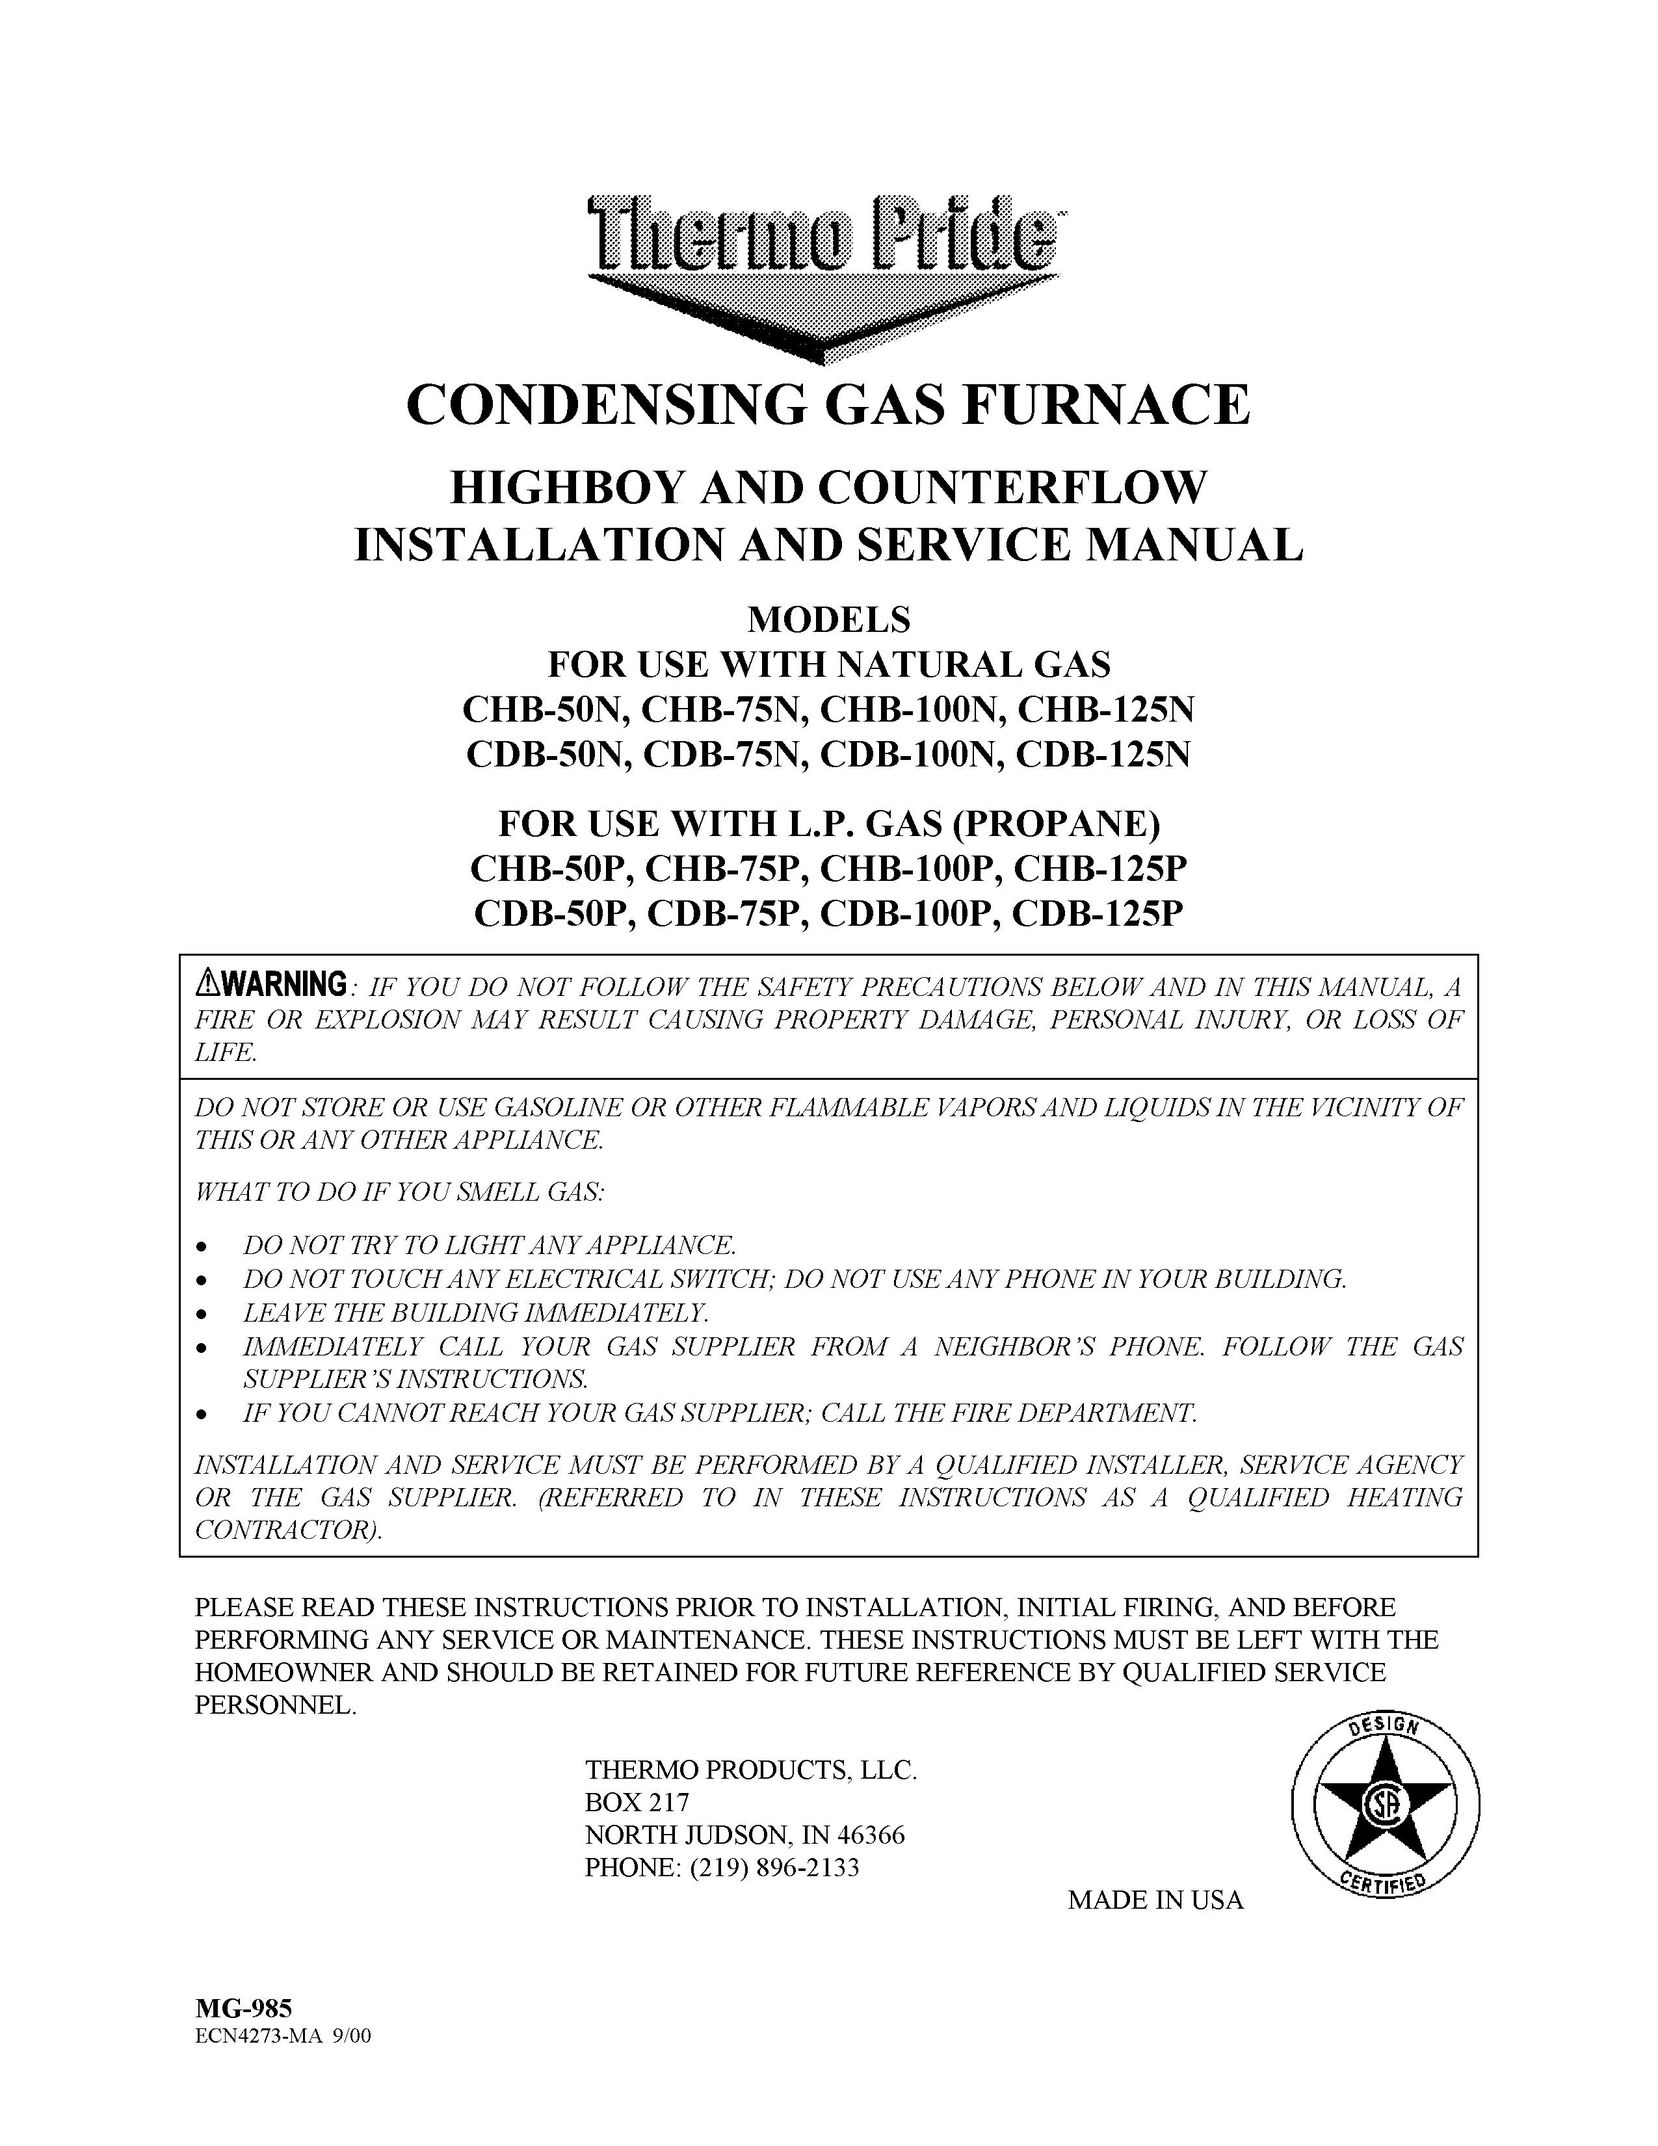 Thermo Products CHB-75N Furnace User Manual